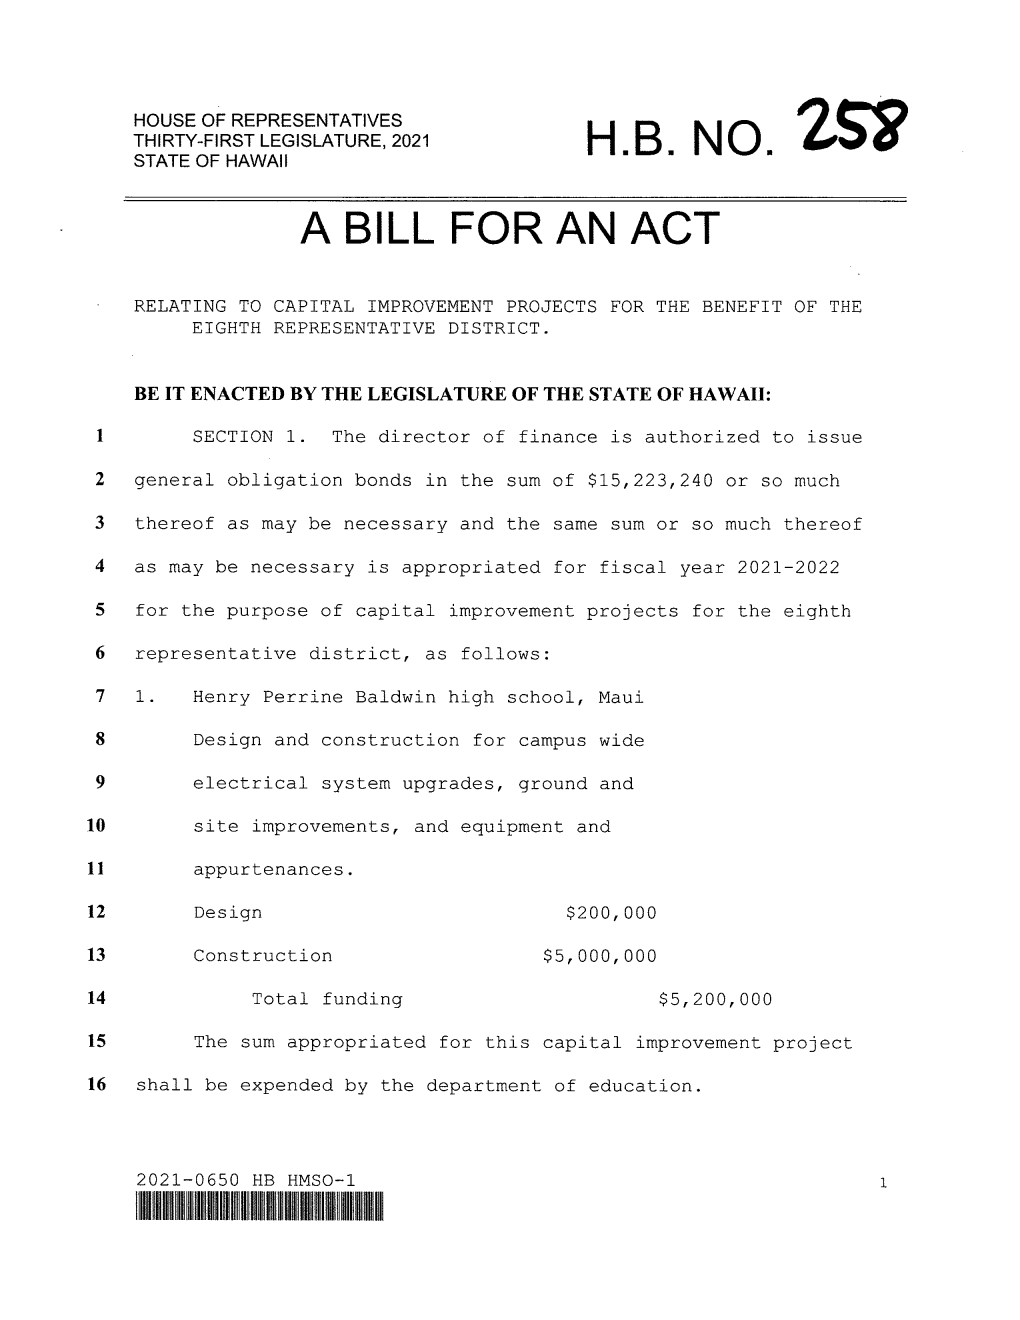 H.B. No. a Bill for an Act